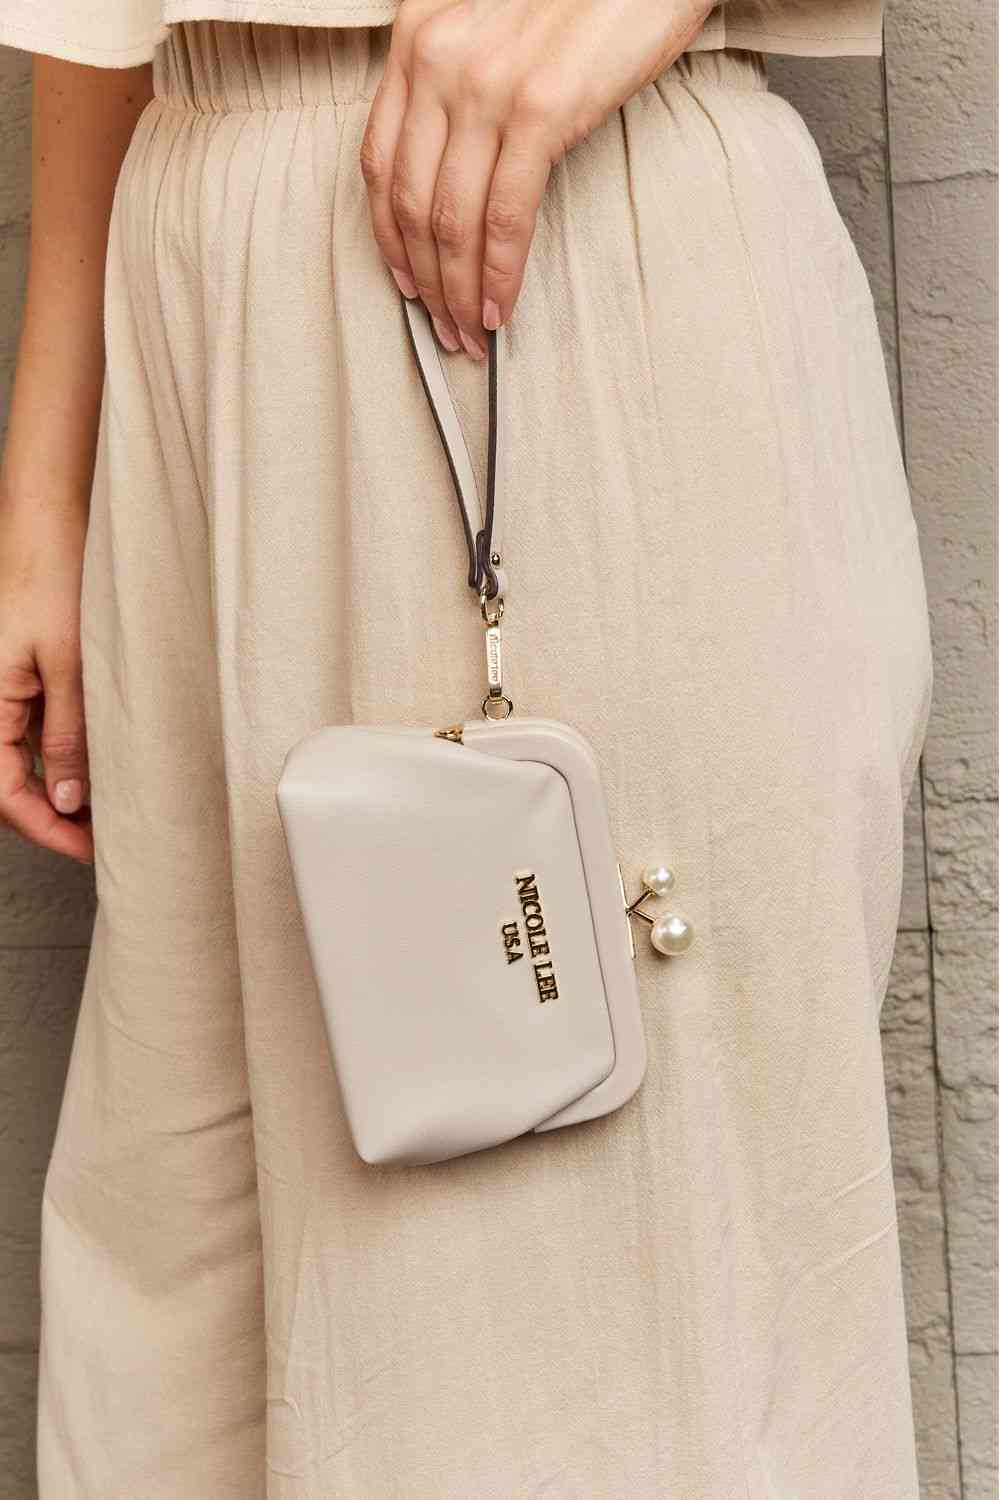 Nicole Lee USA Elise Pearl Coin Purse - GemThreads Boutique